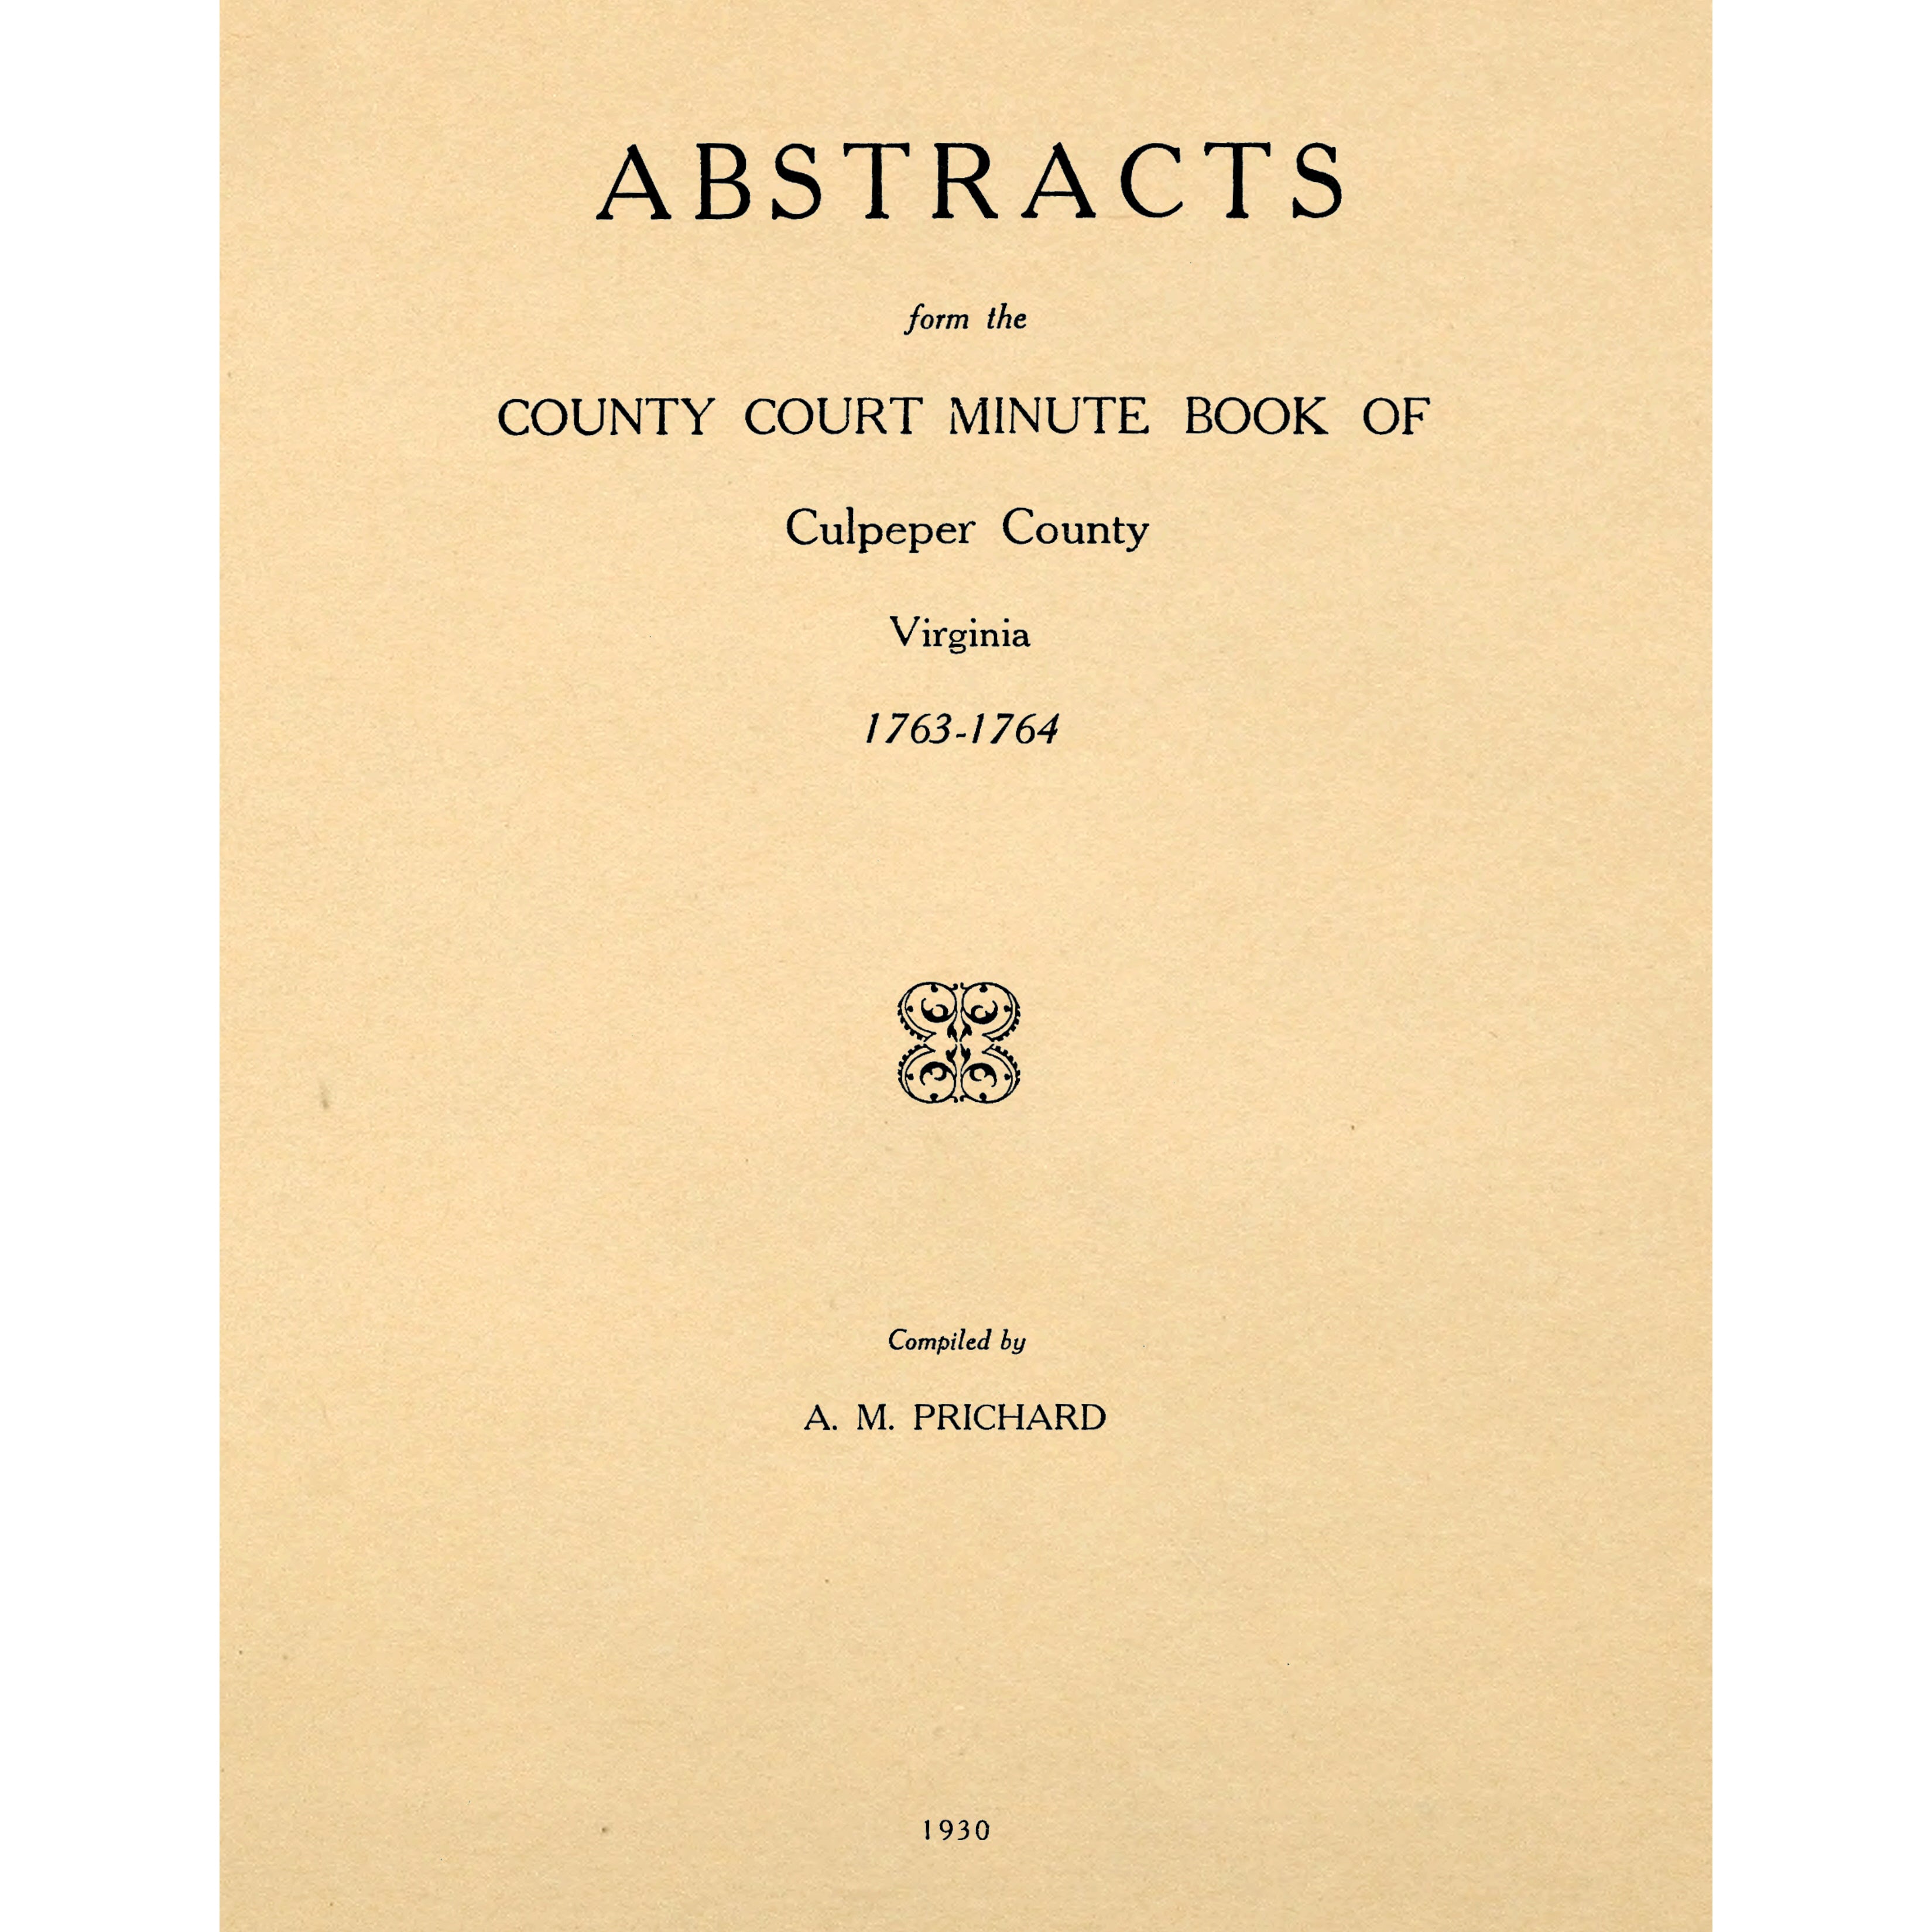 Abstracts From the County Court Minute Book of Culpeper County Virginia 1763-1764